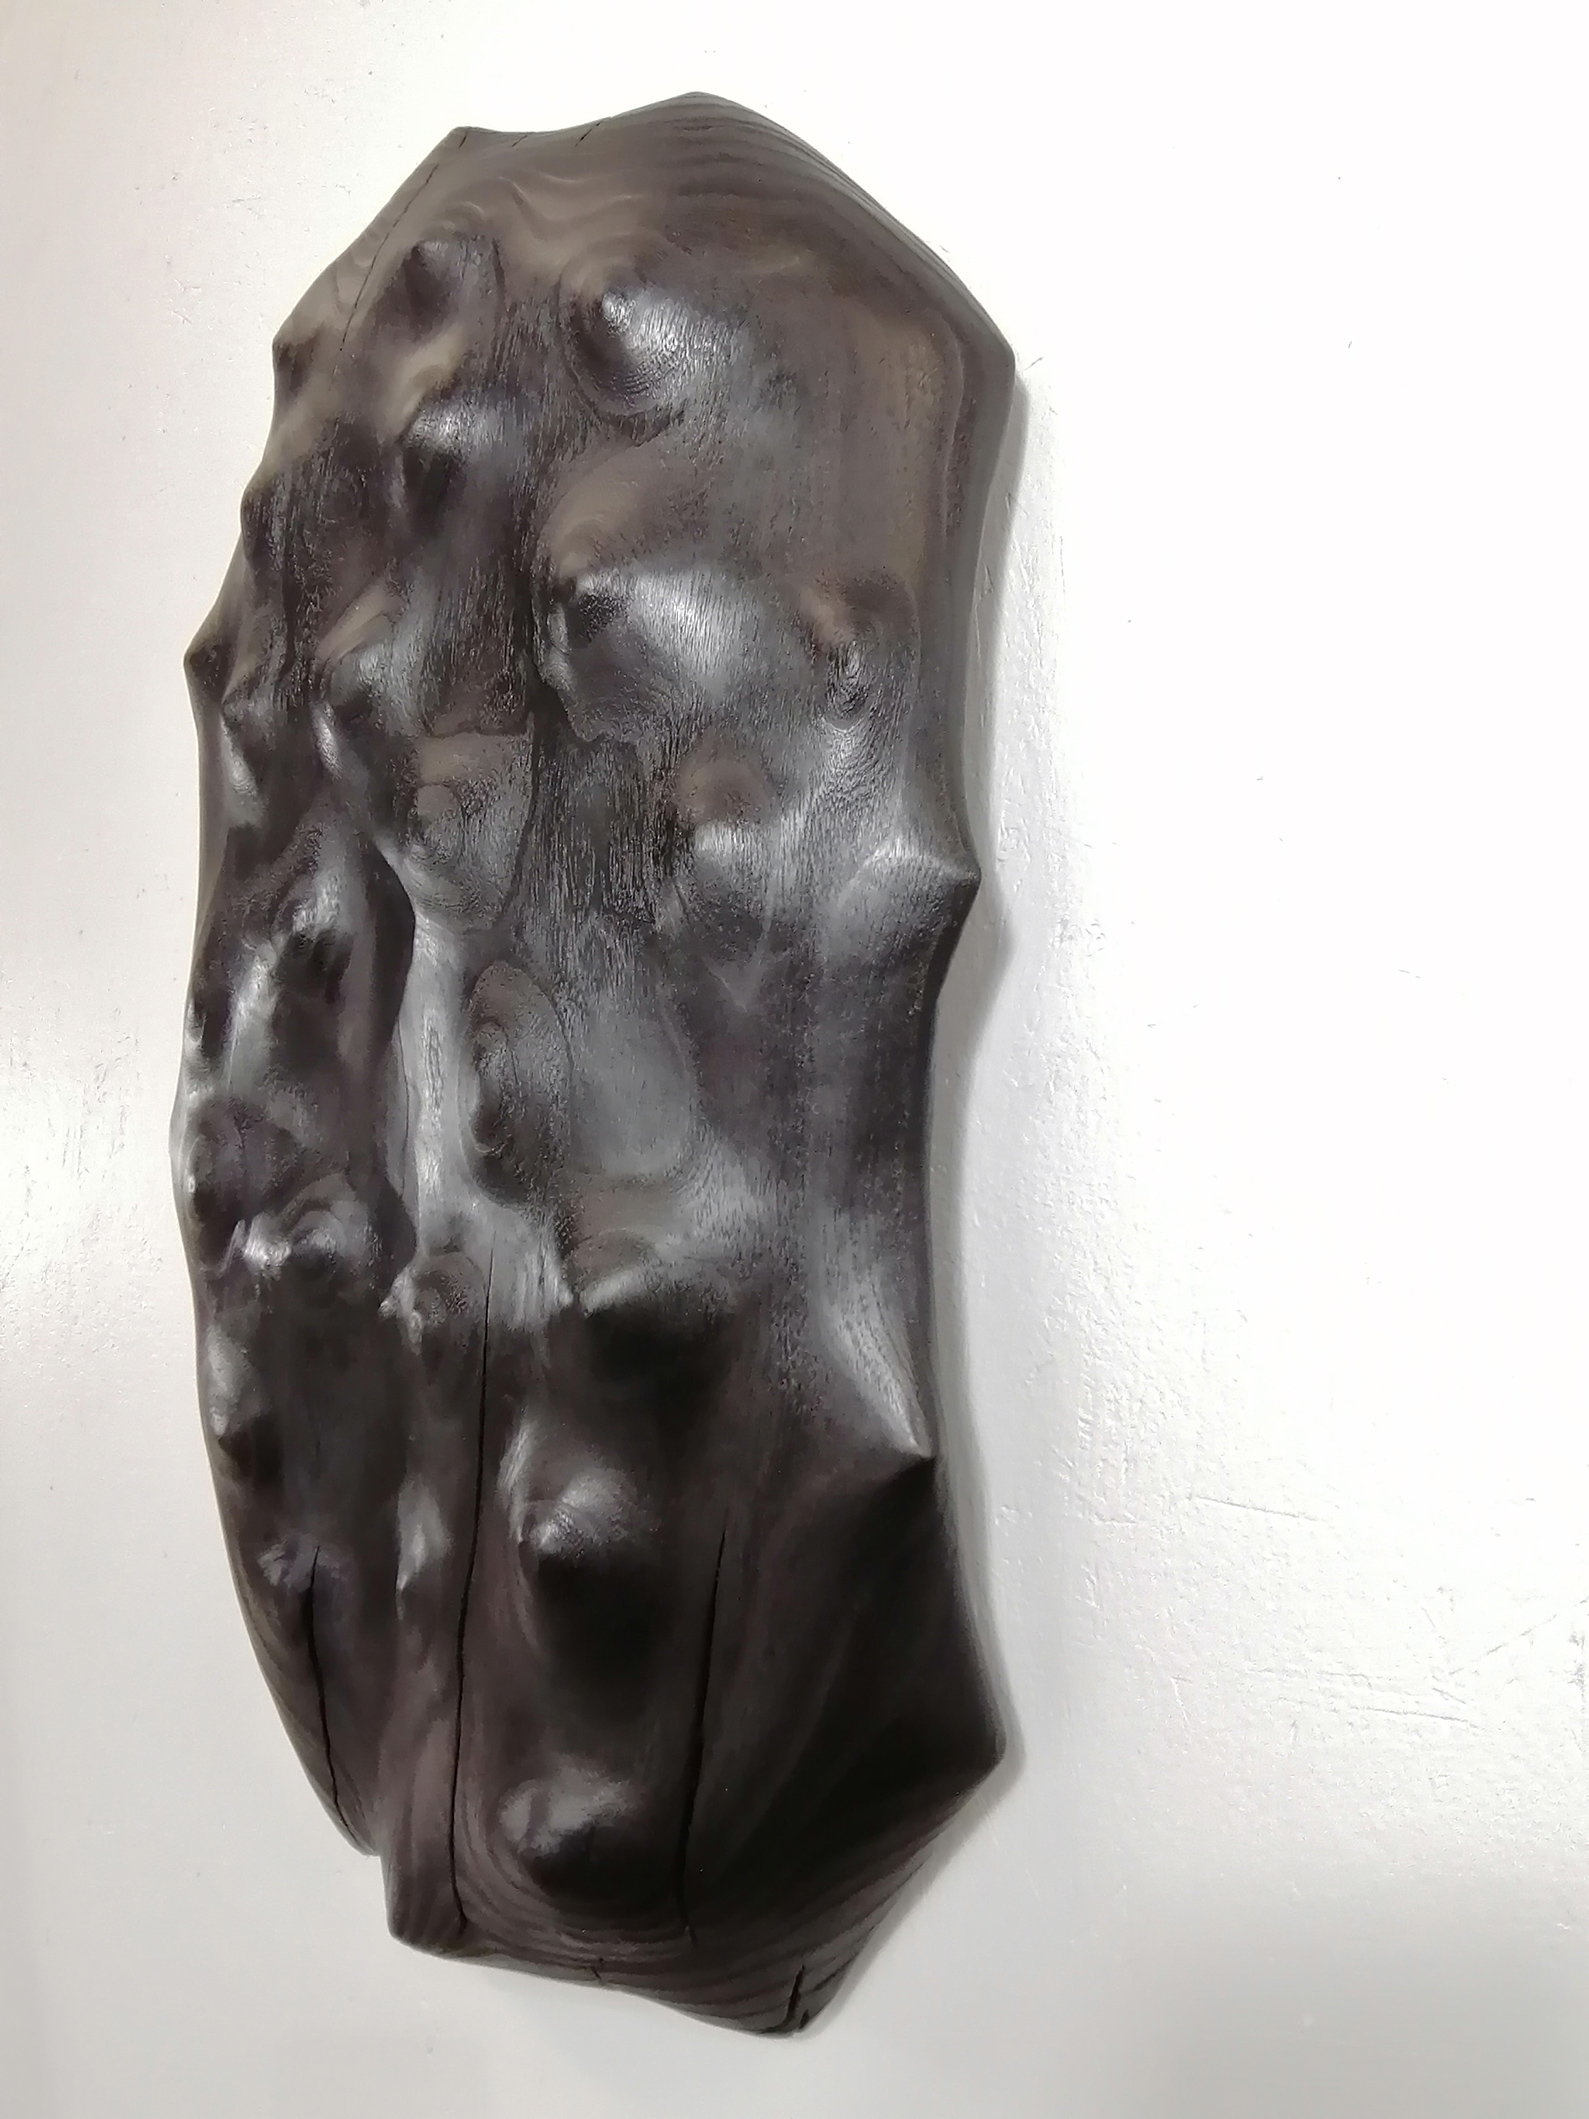 No.16, carved, burnt, stained and oiled wood (catalpa), 26.5"x16"x5"